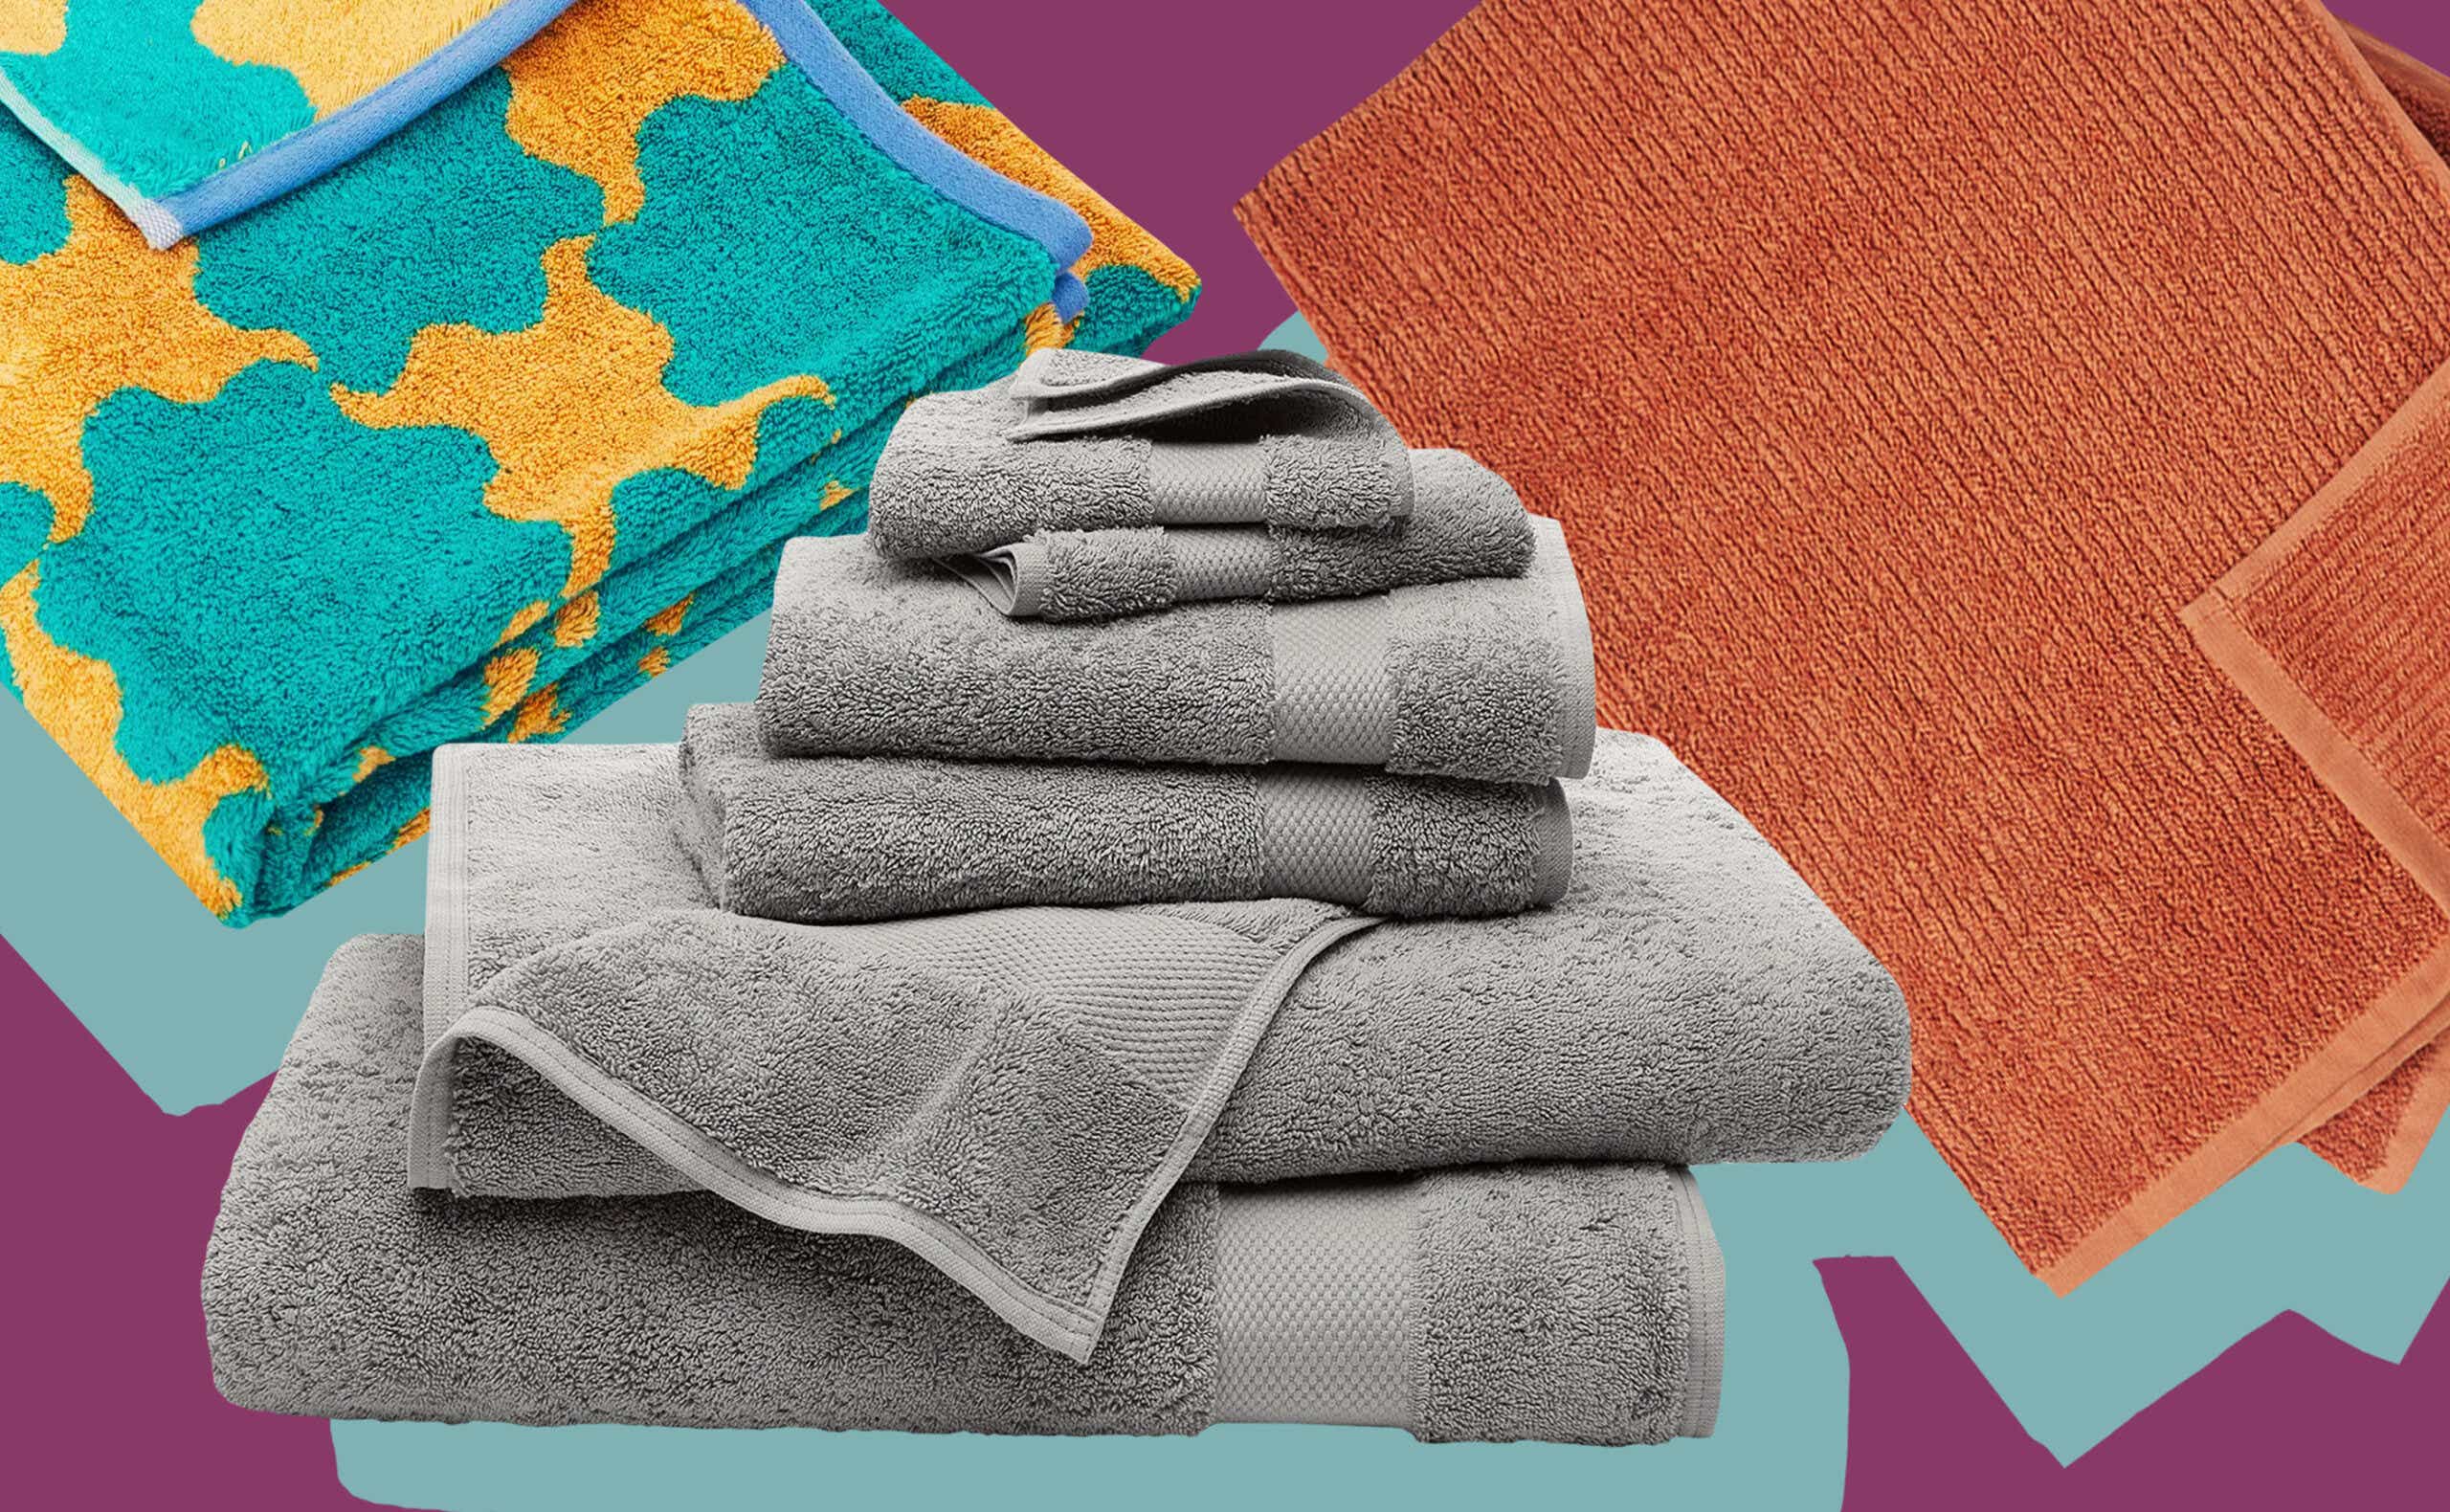 12 Best Bath Towels 2023 - High Quality Towels That Are Affordable